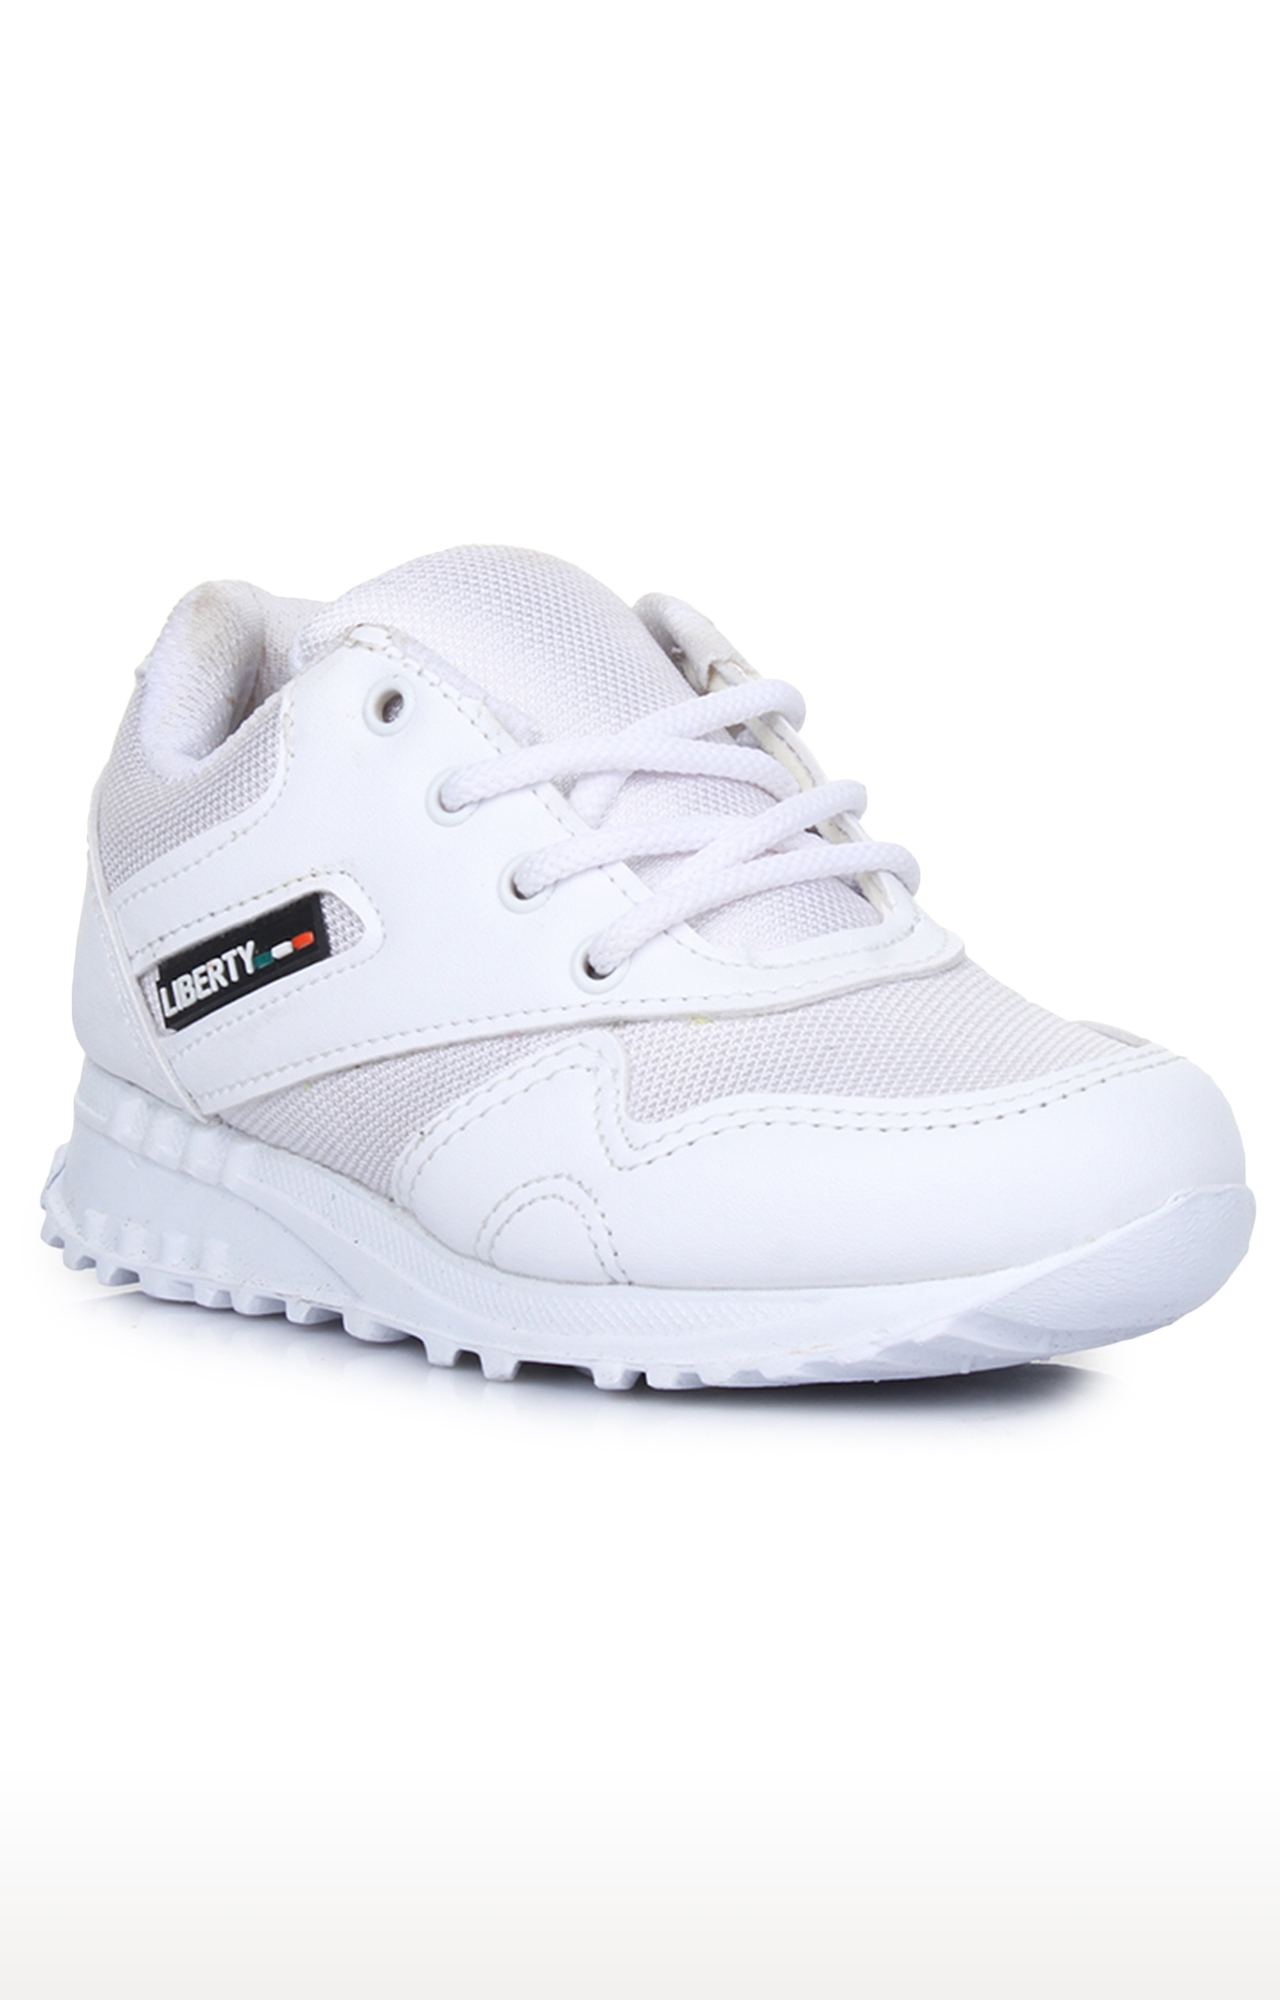 Liberty | Force 10 by Liberty Unisex White Indoor Sports Shoes